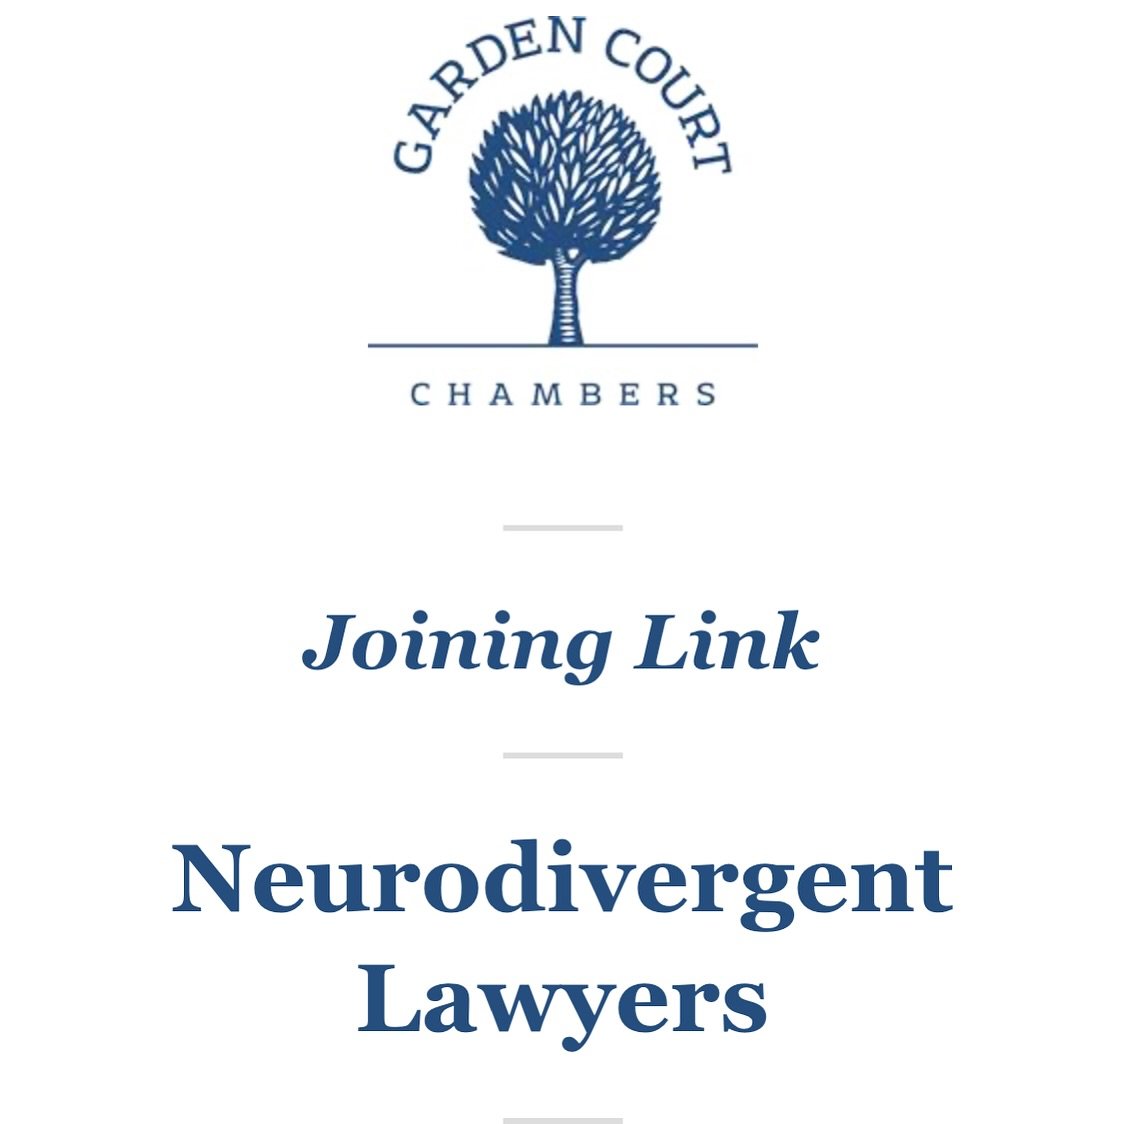 A single most useful hour I have spent this evening enriching one&rsquo;s own life, both personally and professionally. Actually, I think I just enriched my clients&rsquo; lives too. Ahem. 

@gardencourtchambers

#neurodivergent 
#lawyer
#justice
#UK